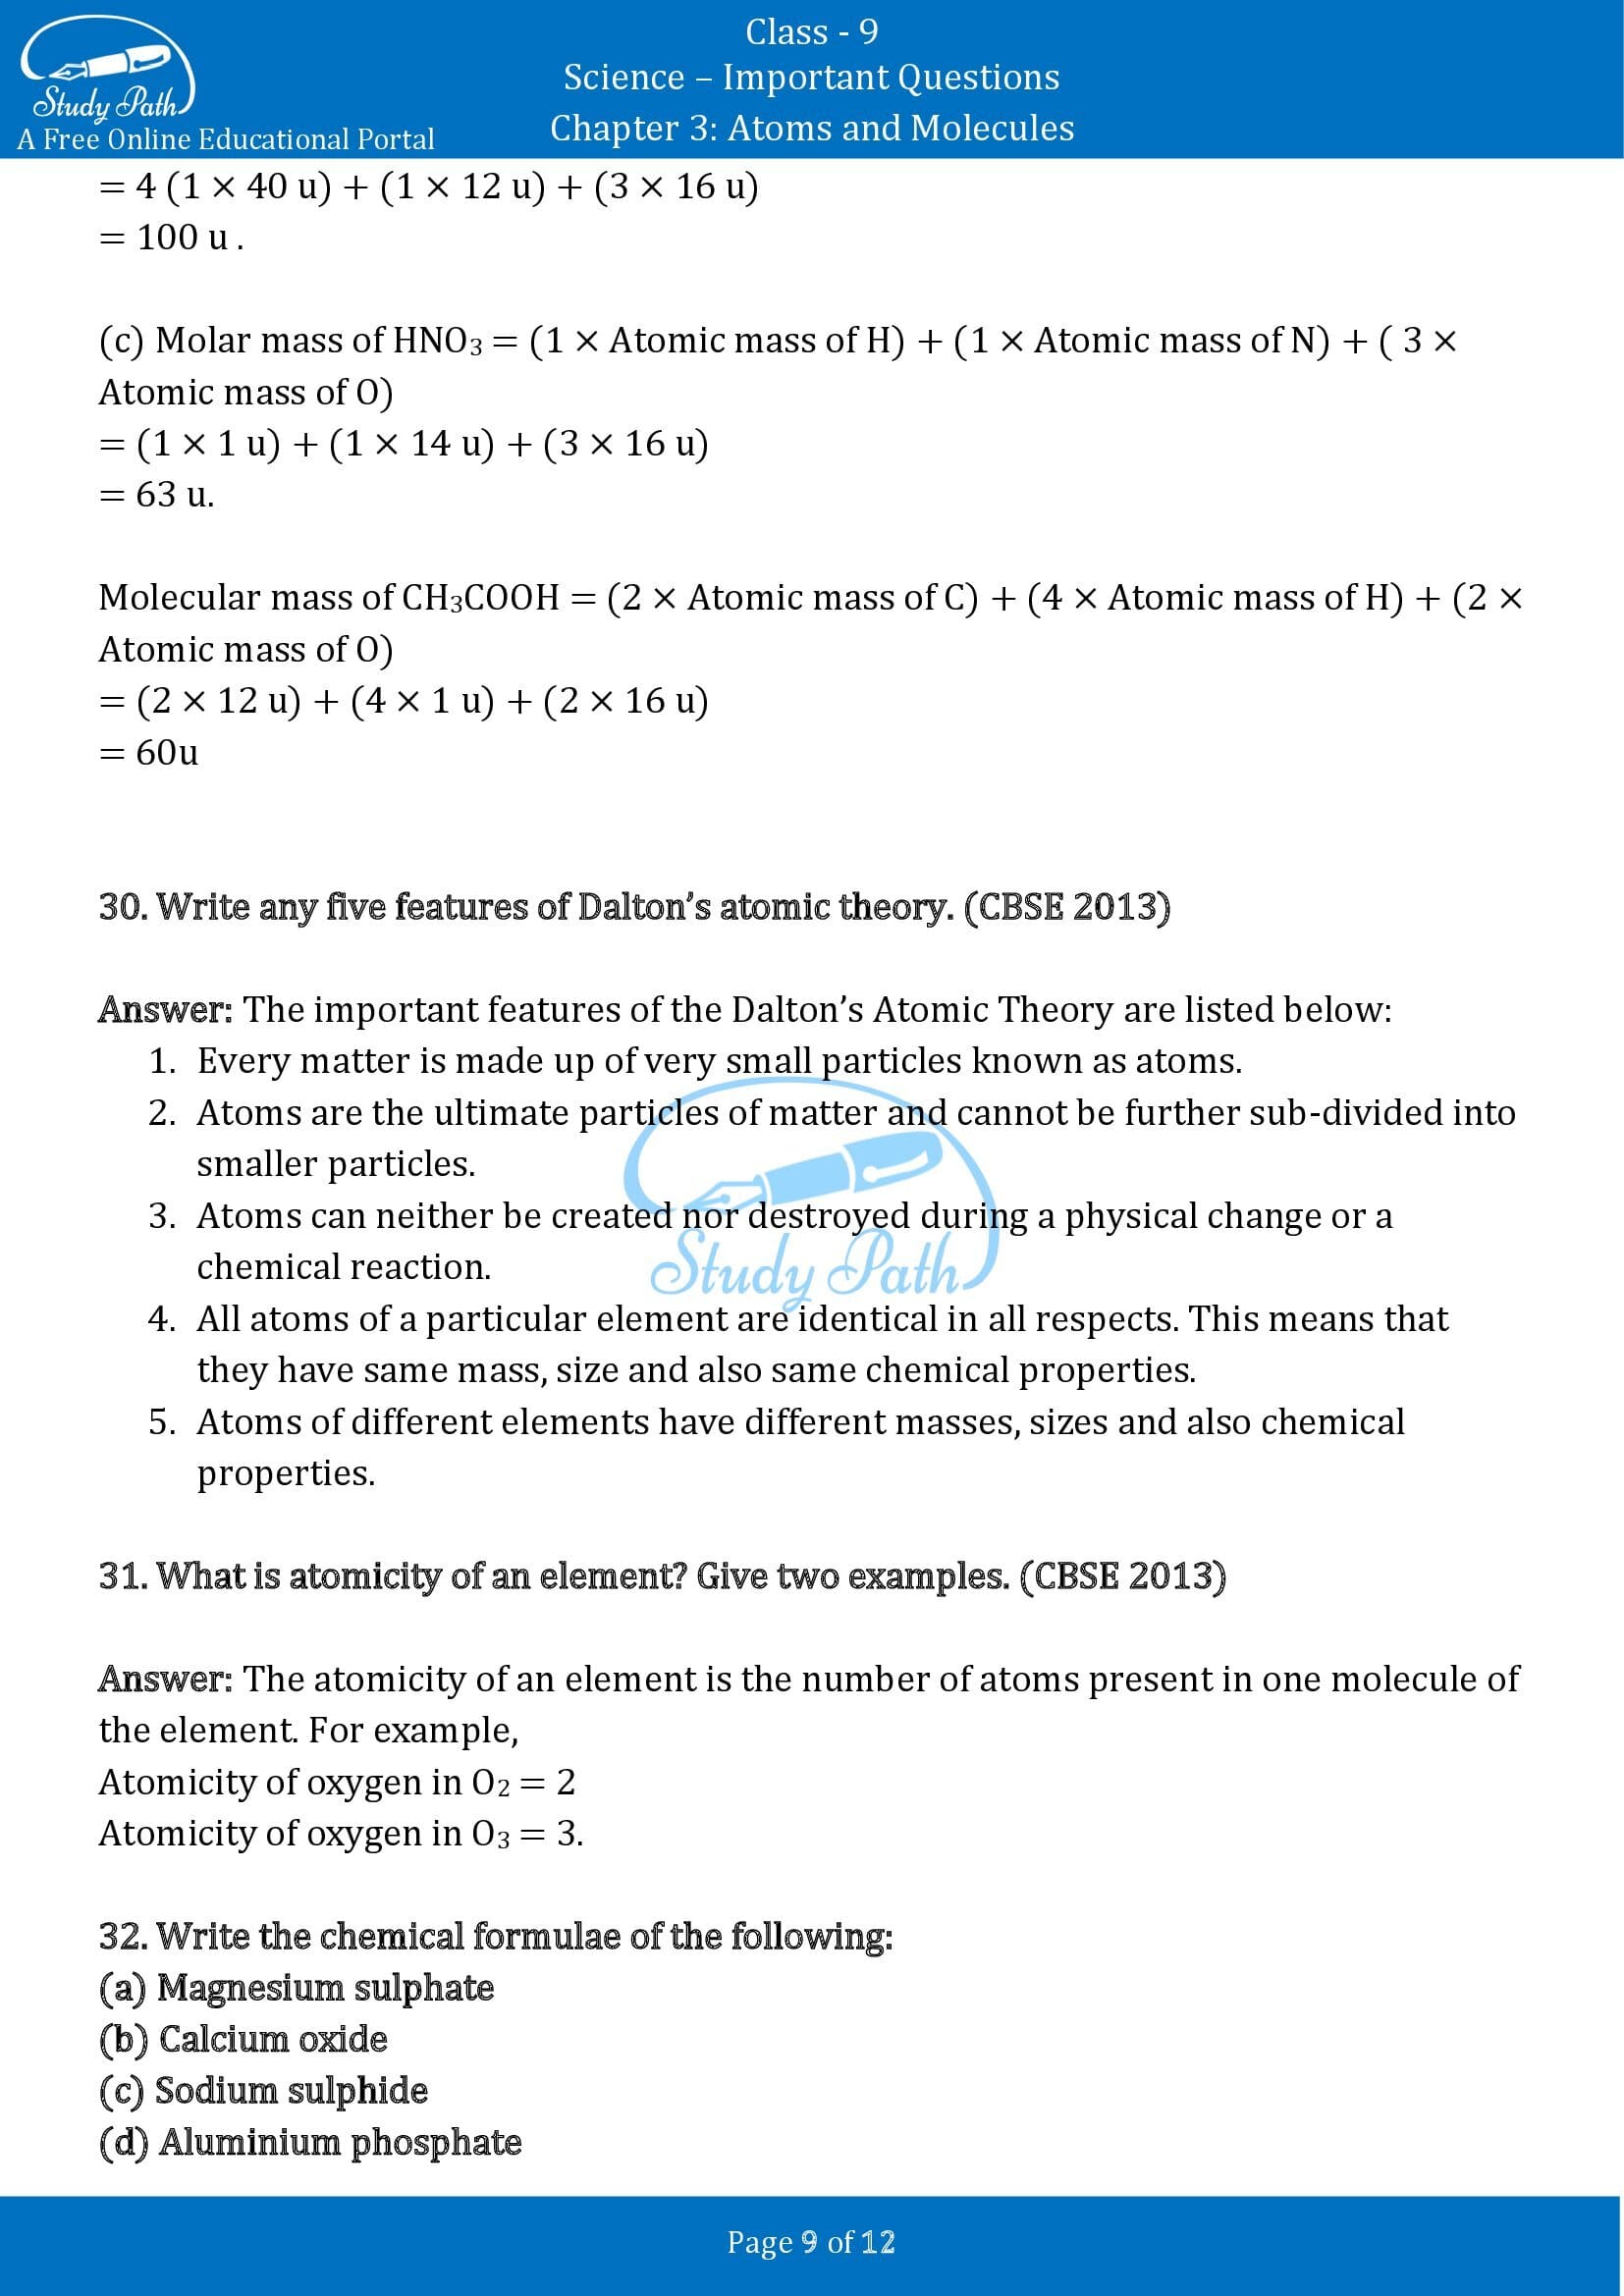 Important Questions for Class 9 Science Chapter 3 Atoms and Molecules 00009